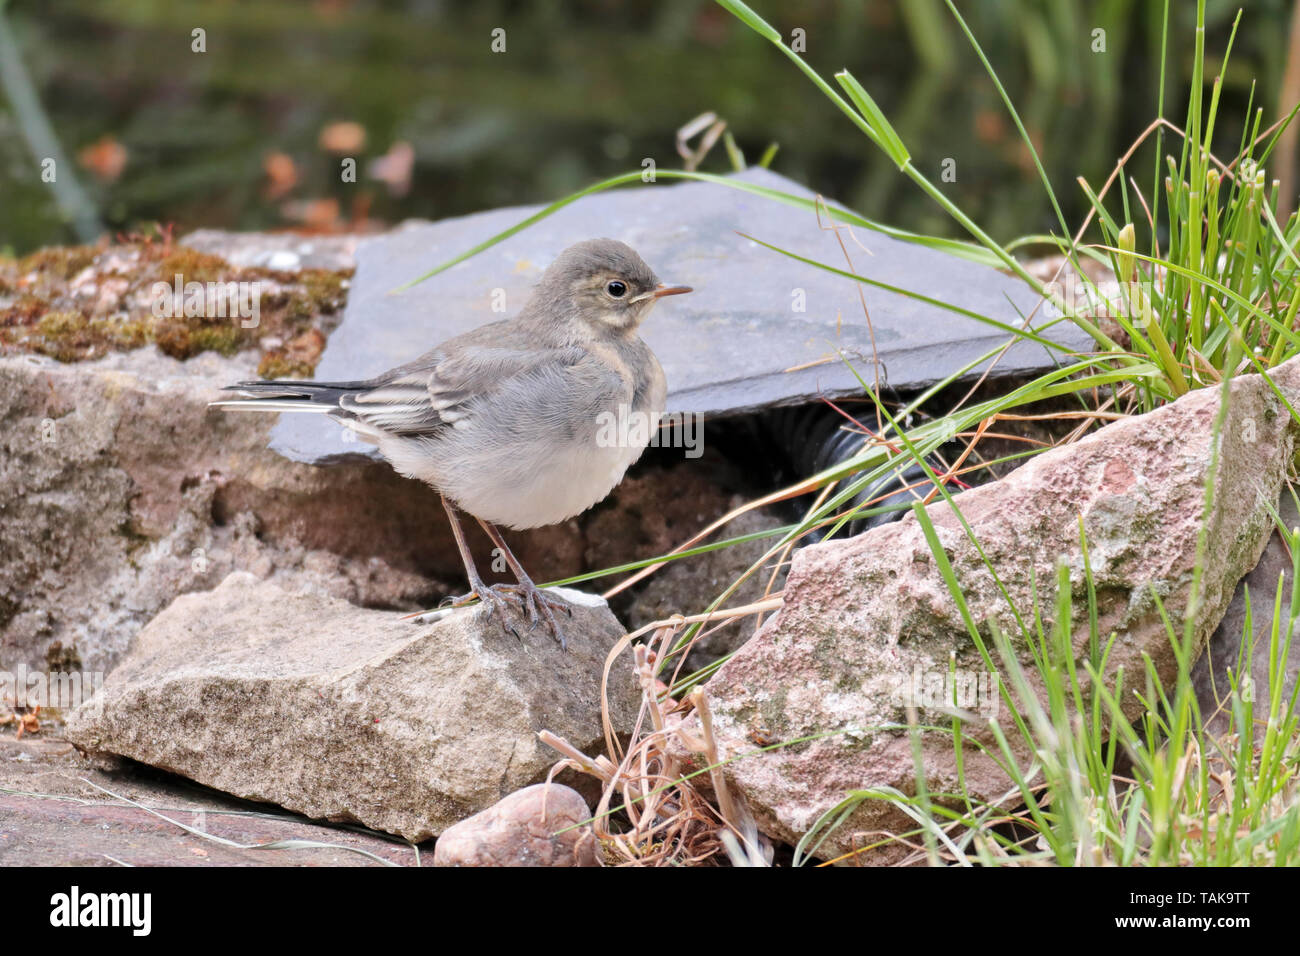 A Pied Wagtail Fledgling perched on a rock by a garden pond waiting for mum to return with food. One of four fledglings born in the spring 2019. Stock Photo